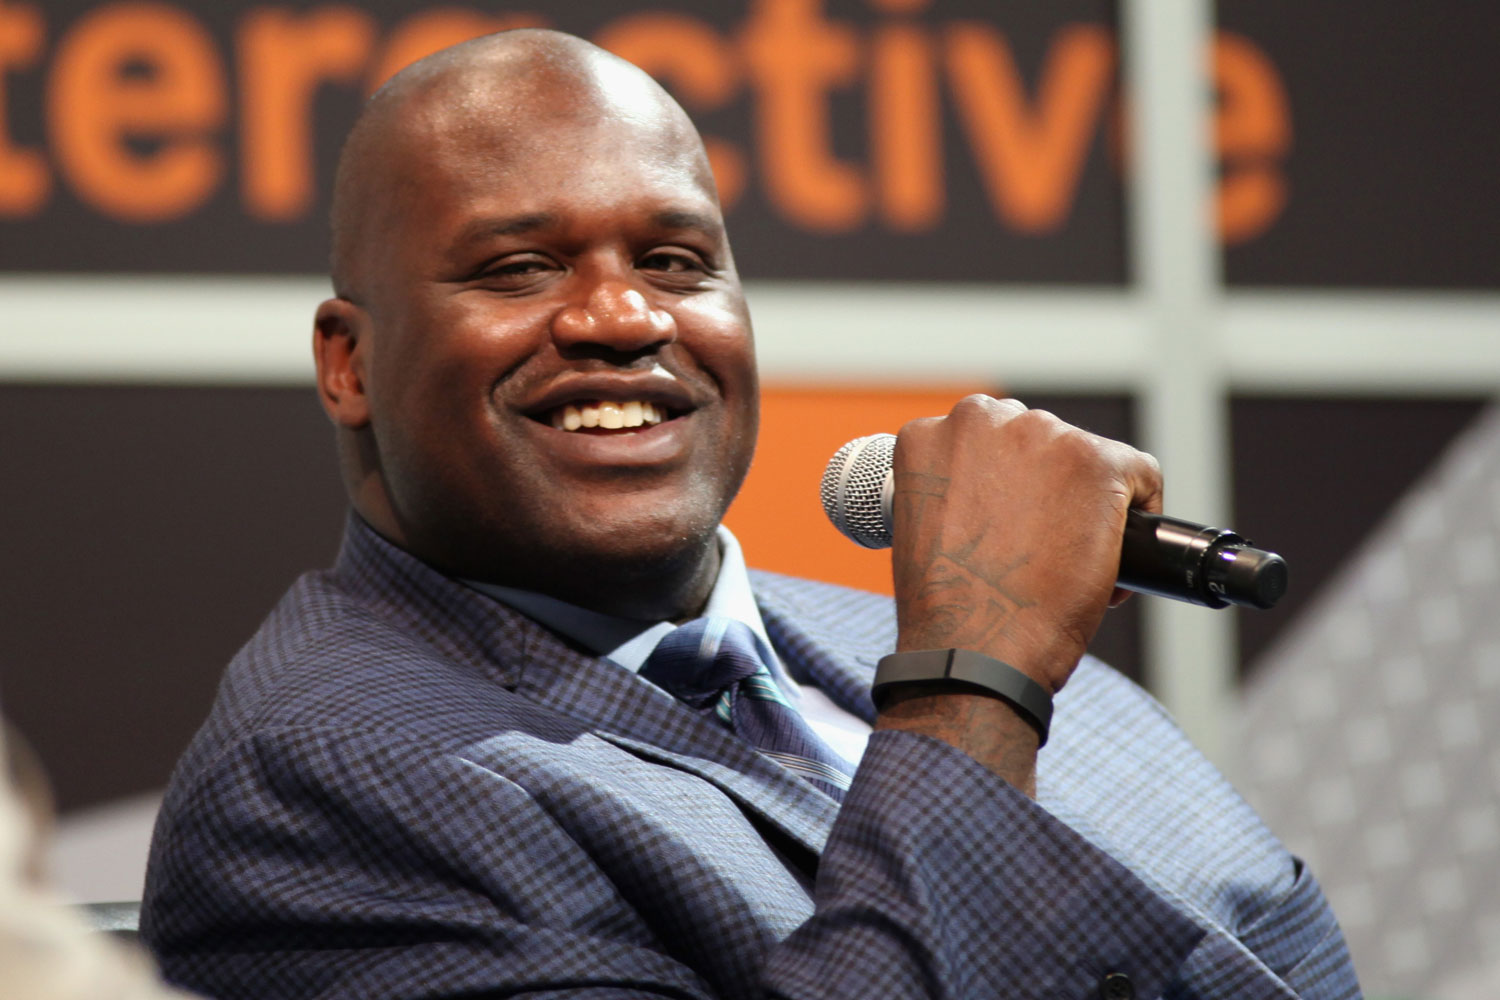 Shaquille ONeal confiesa gastase más de 700 euros semanales en aplicaciones y juegos